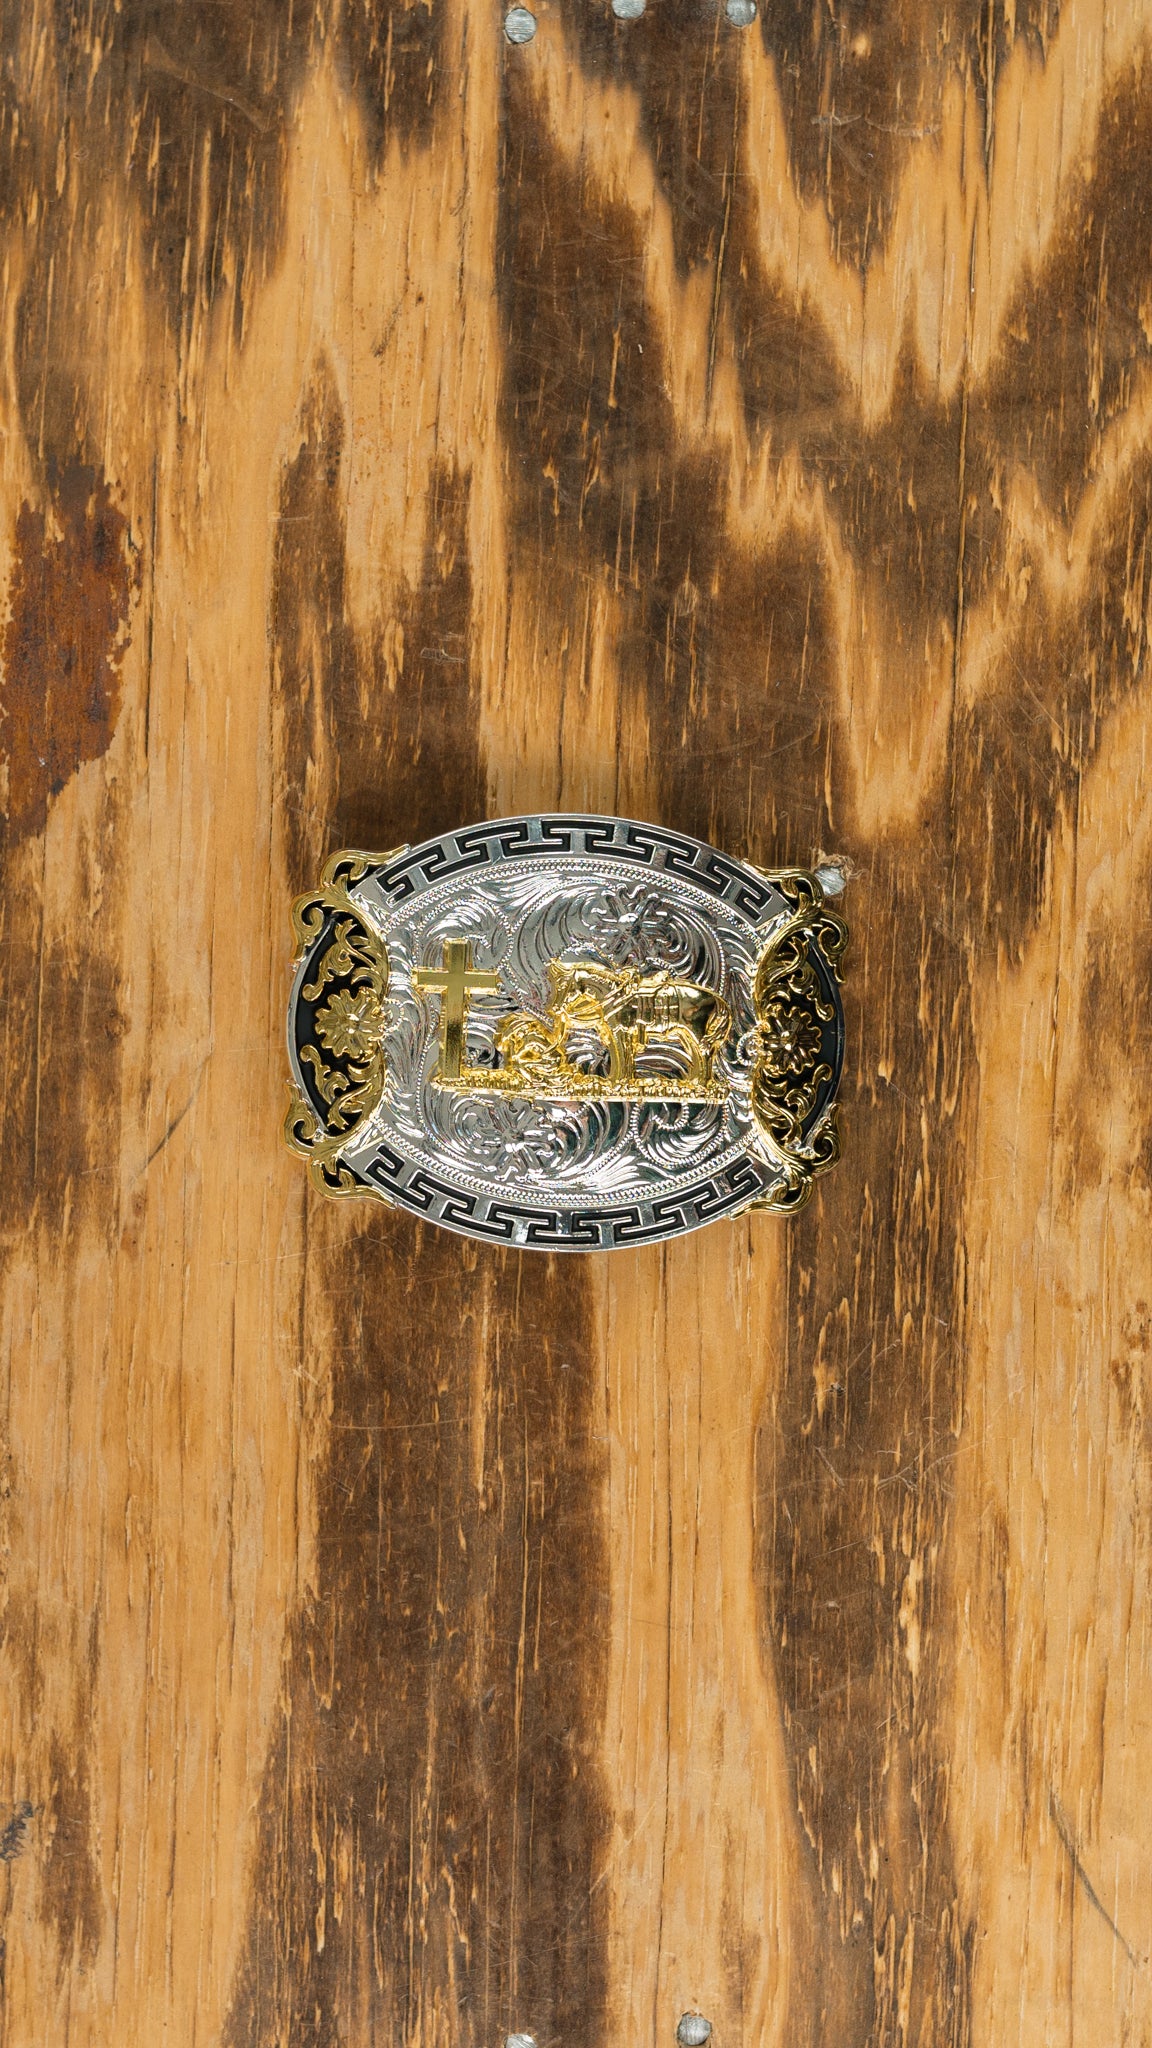 Cowboy Cross Silver and Gold Belt Buckle